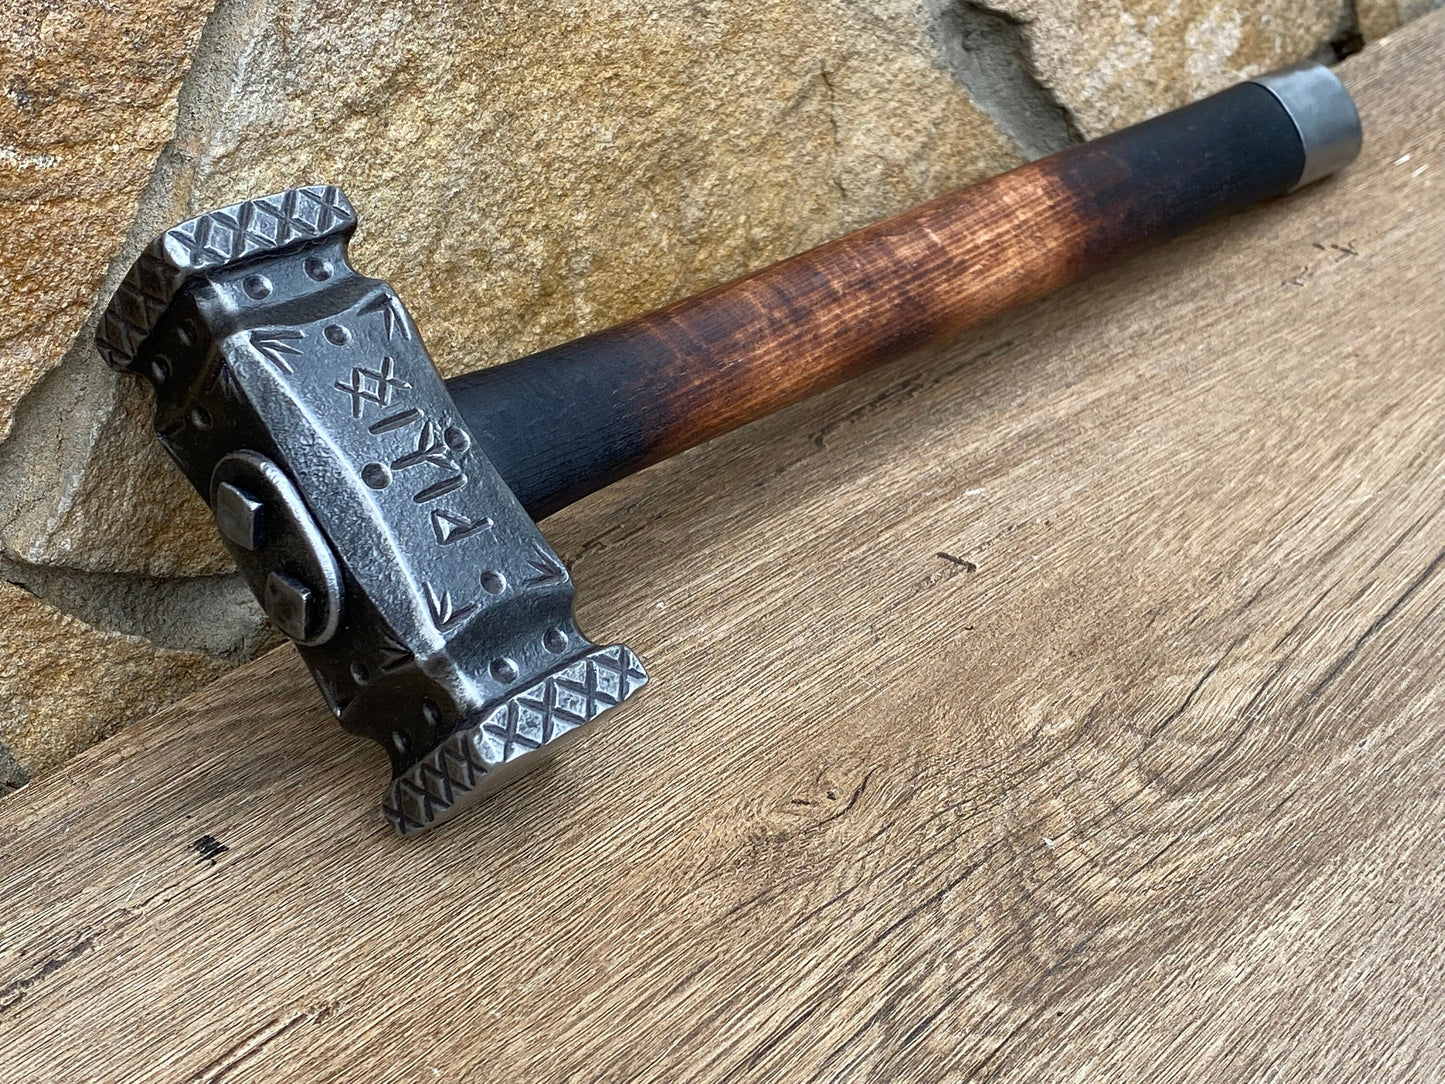 Hammer, viking,mens gift, Christmas, birthday, iron gift, anniversary, steel gift, Fathers Day, dads gift, army gift,retirement,wedding gift